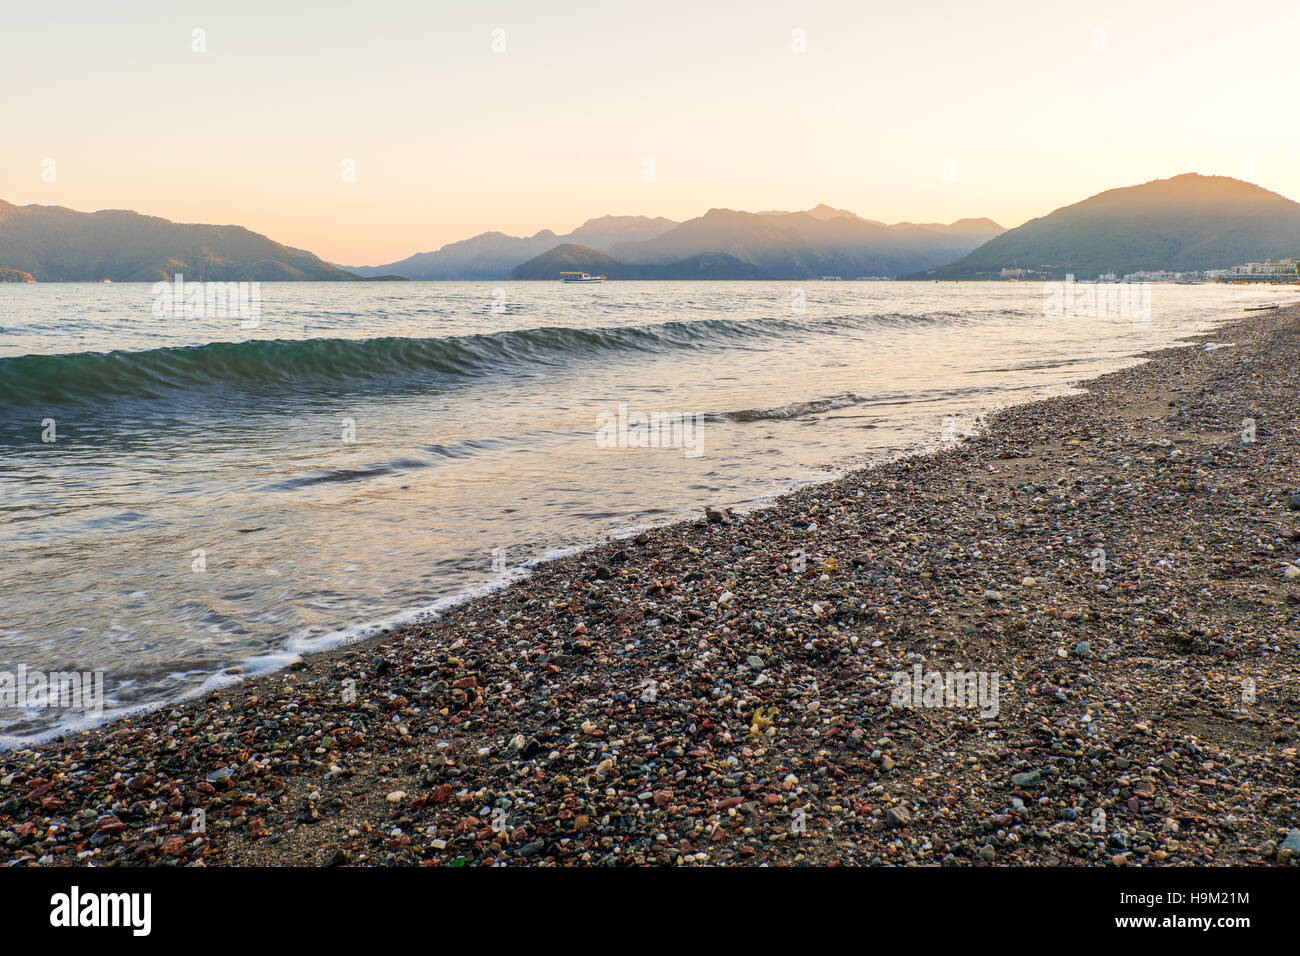 Sea wave on a beach and scenery of Marmaris Stock Photo